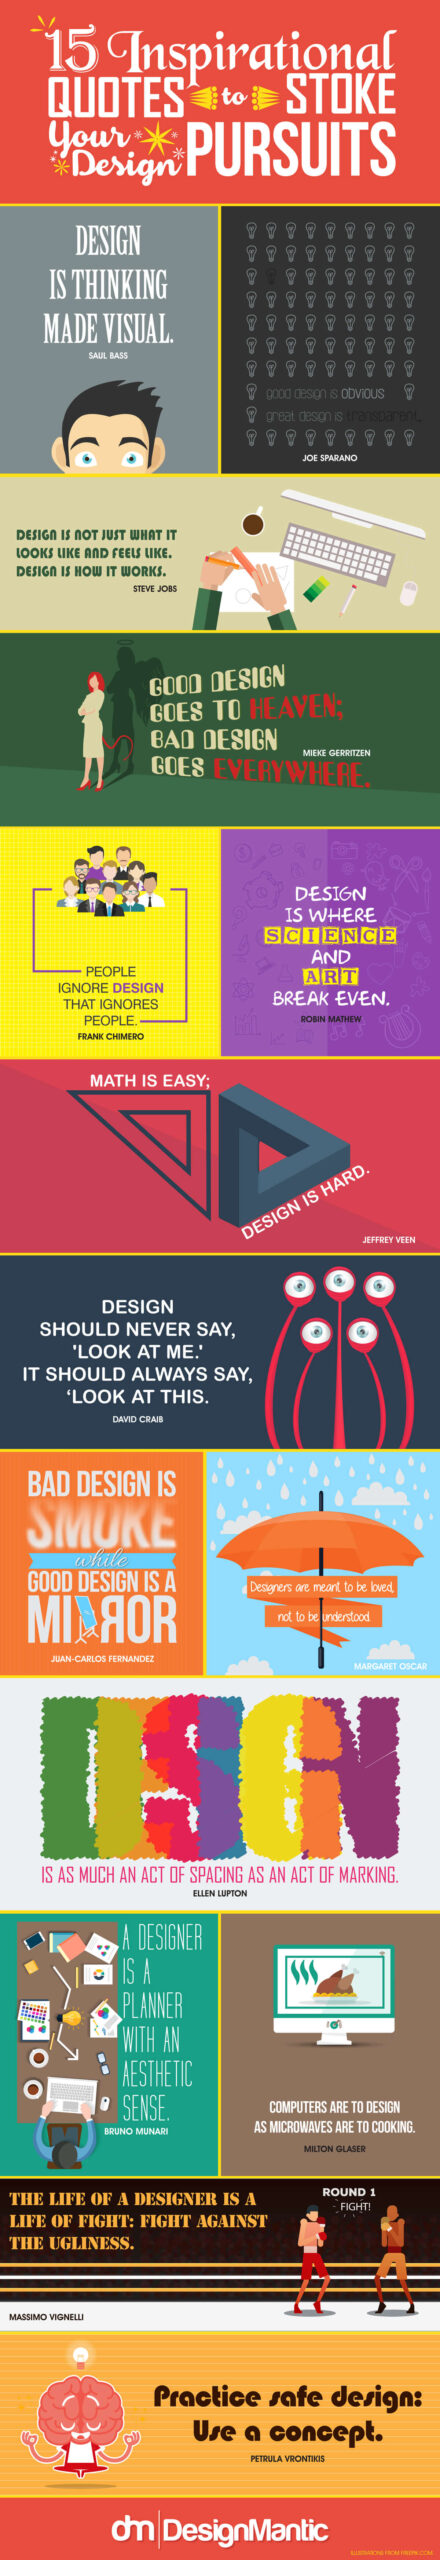 9+ Business Infographic Examples & Ideas  Daily Design Inspiration #23